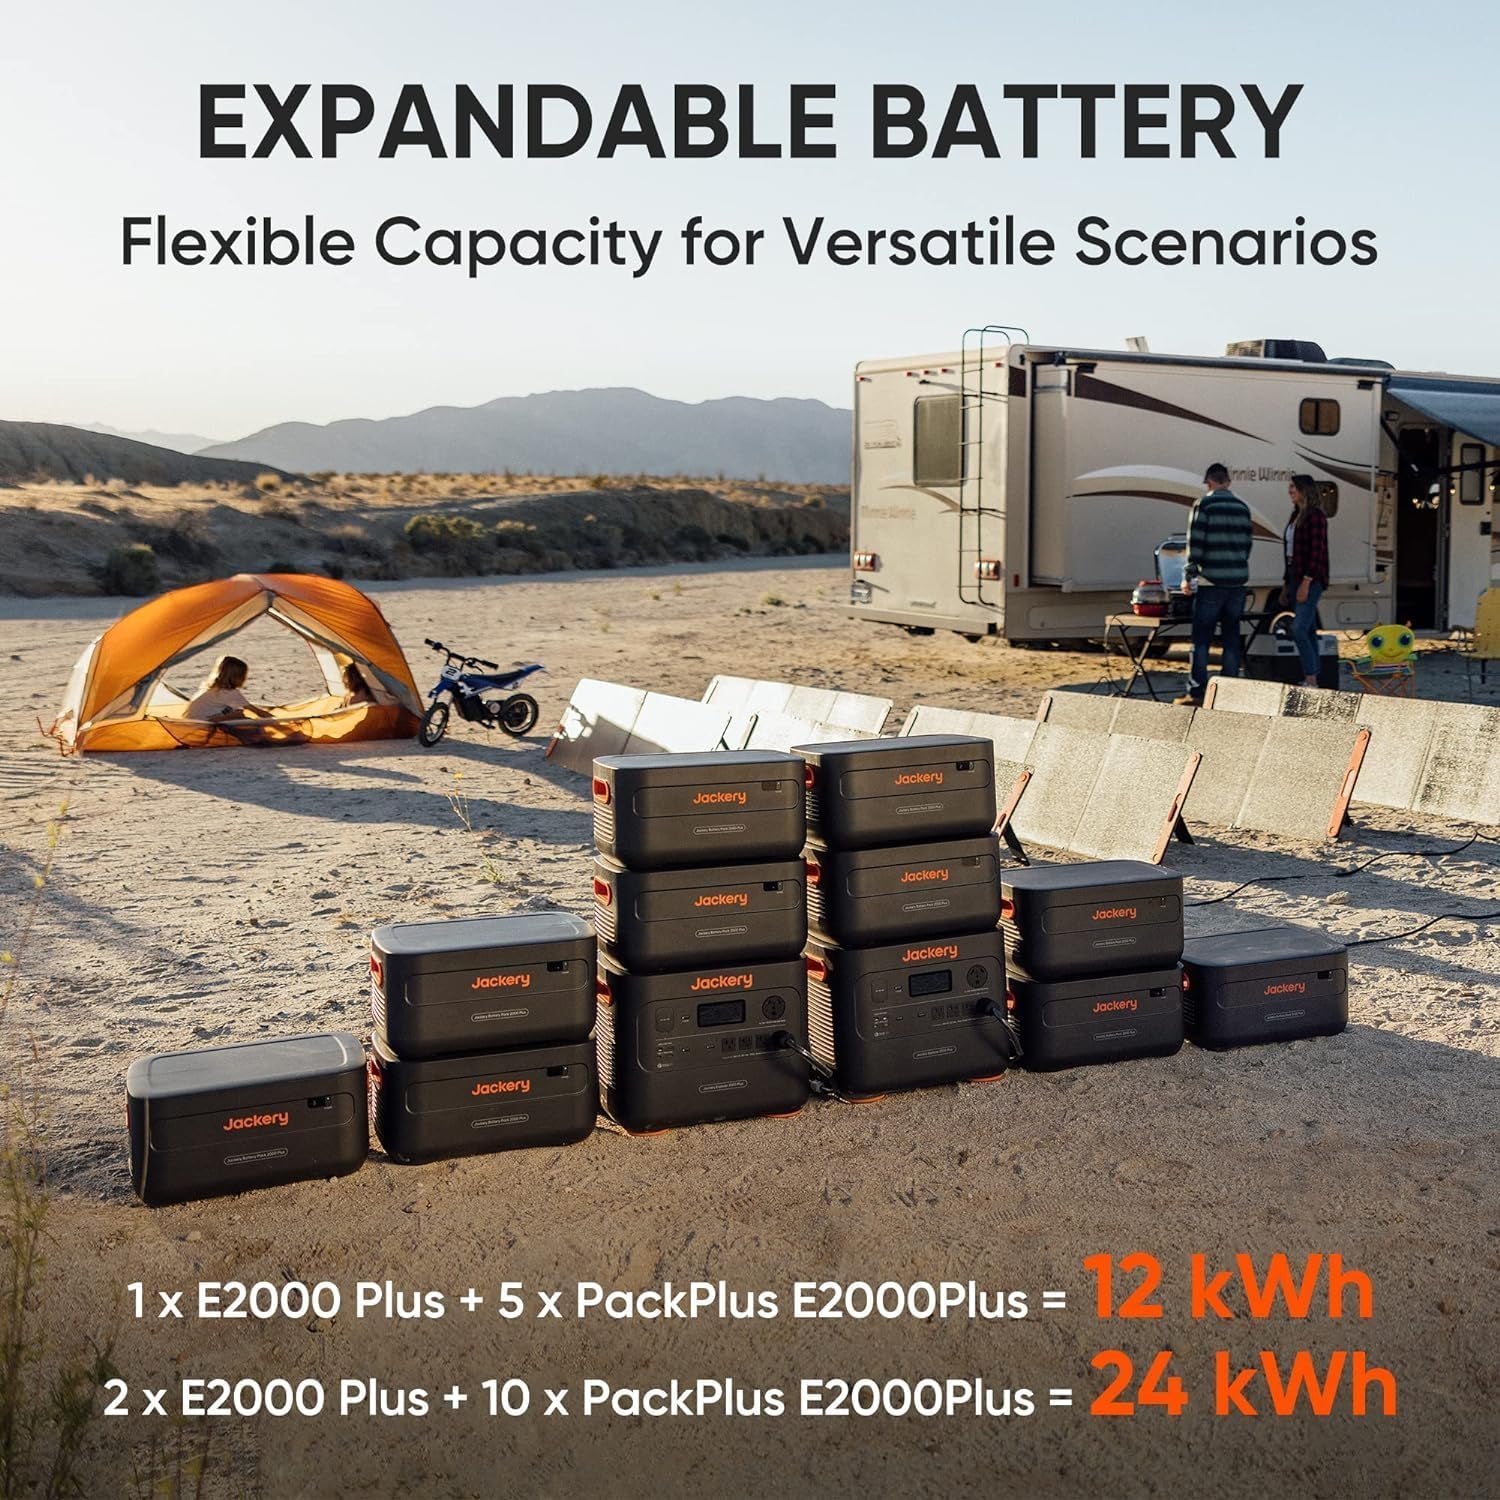 Portable Power Station Explorer 2000 Plus, Solar Generator with 2042Wh Lifepo4 Battery 3000W Output, Expandable to 24Kwh 6000W, for Outdoor RV Camping & Emergency (Solar Panel Optional)